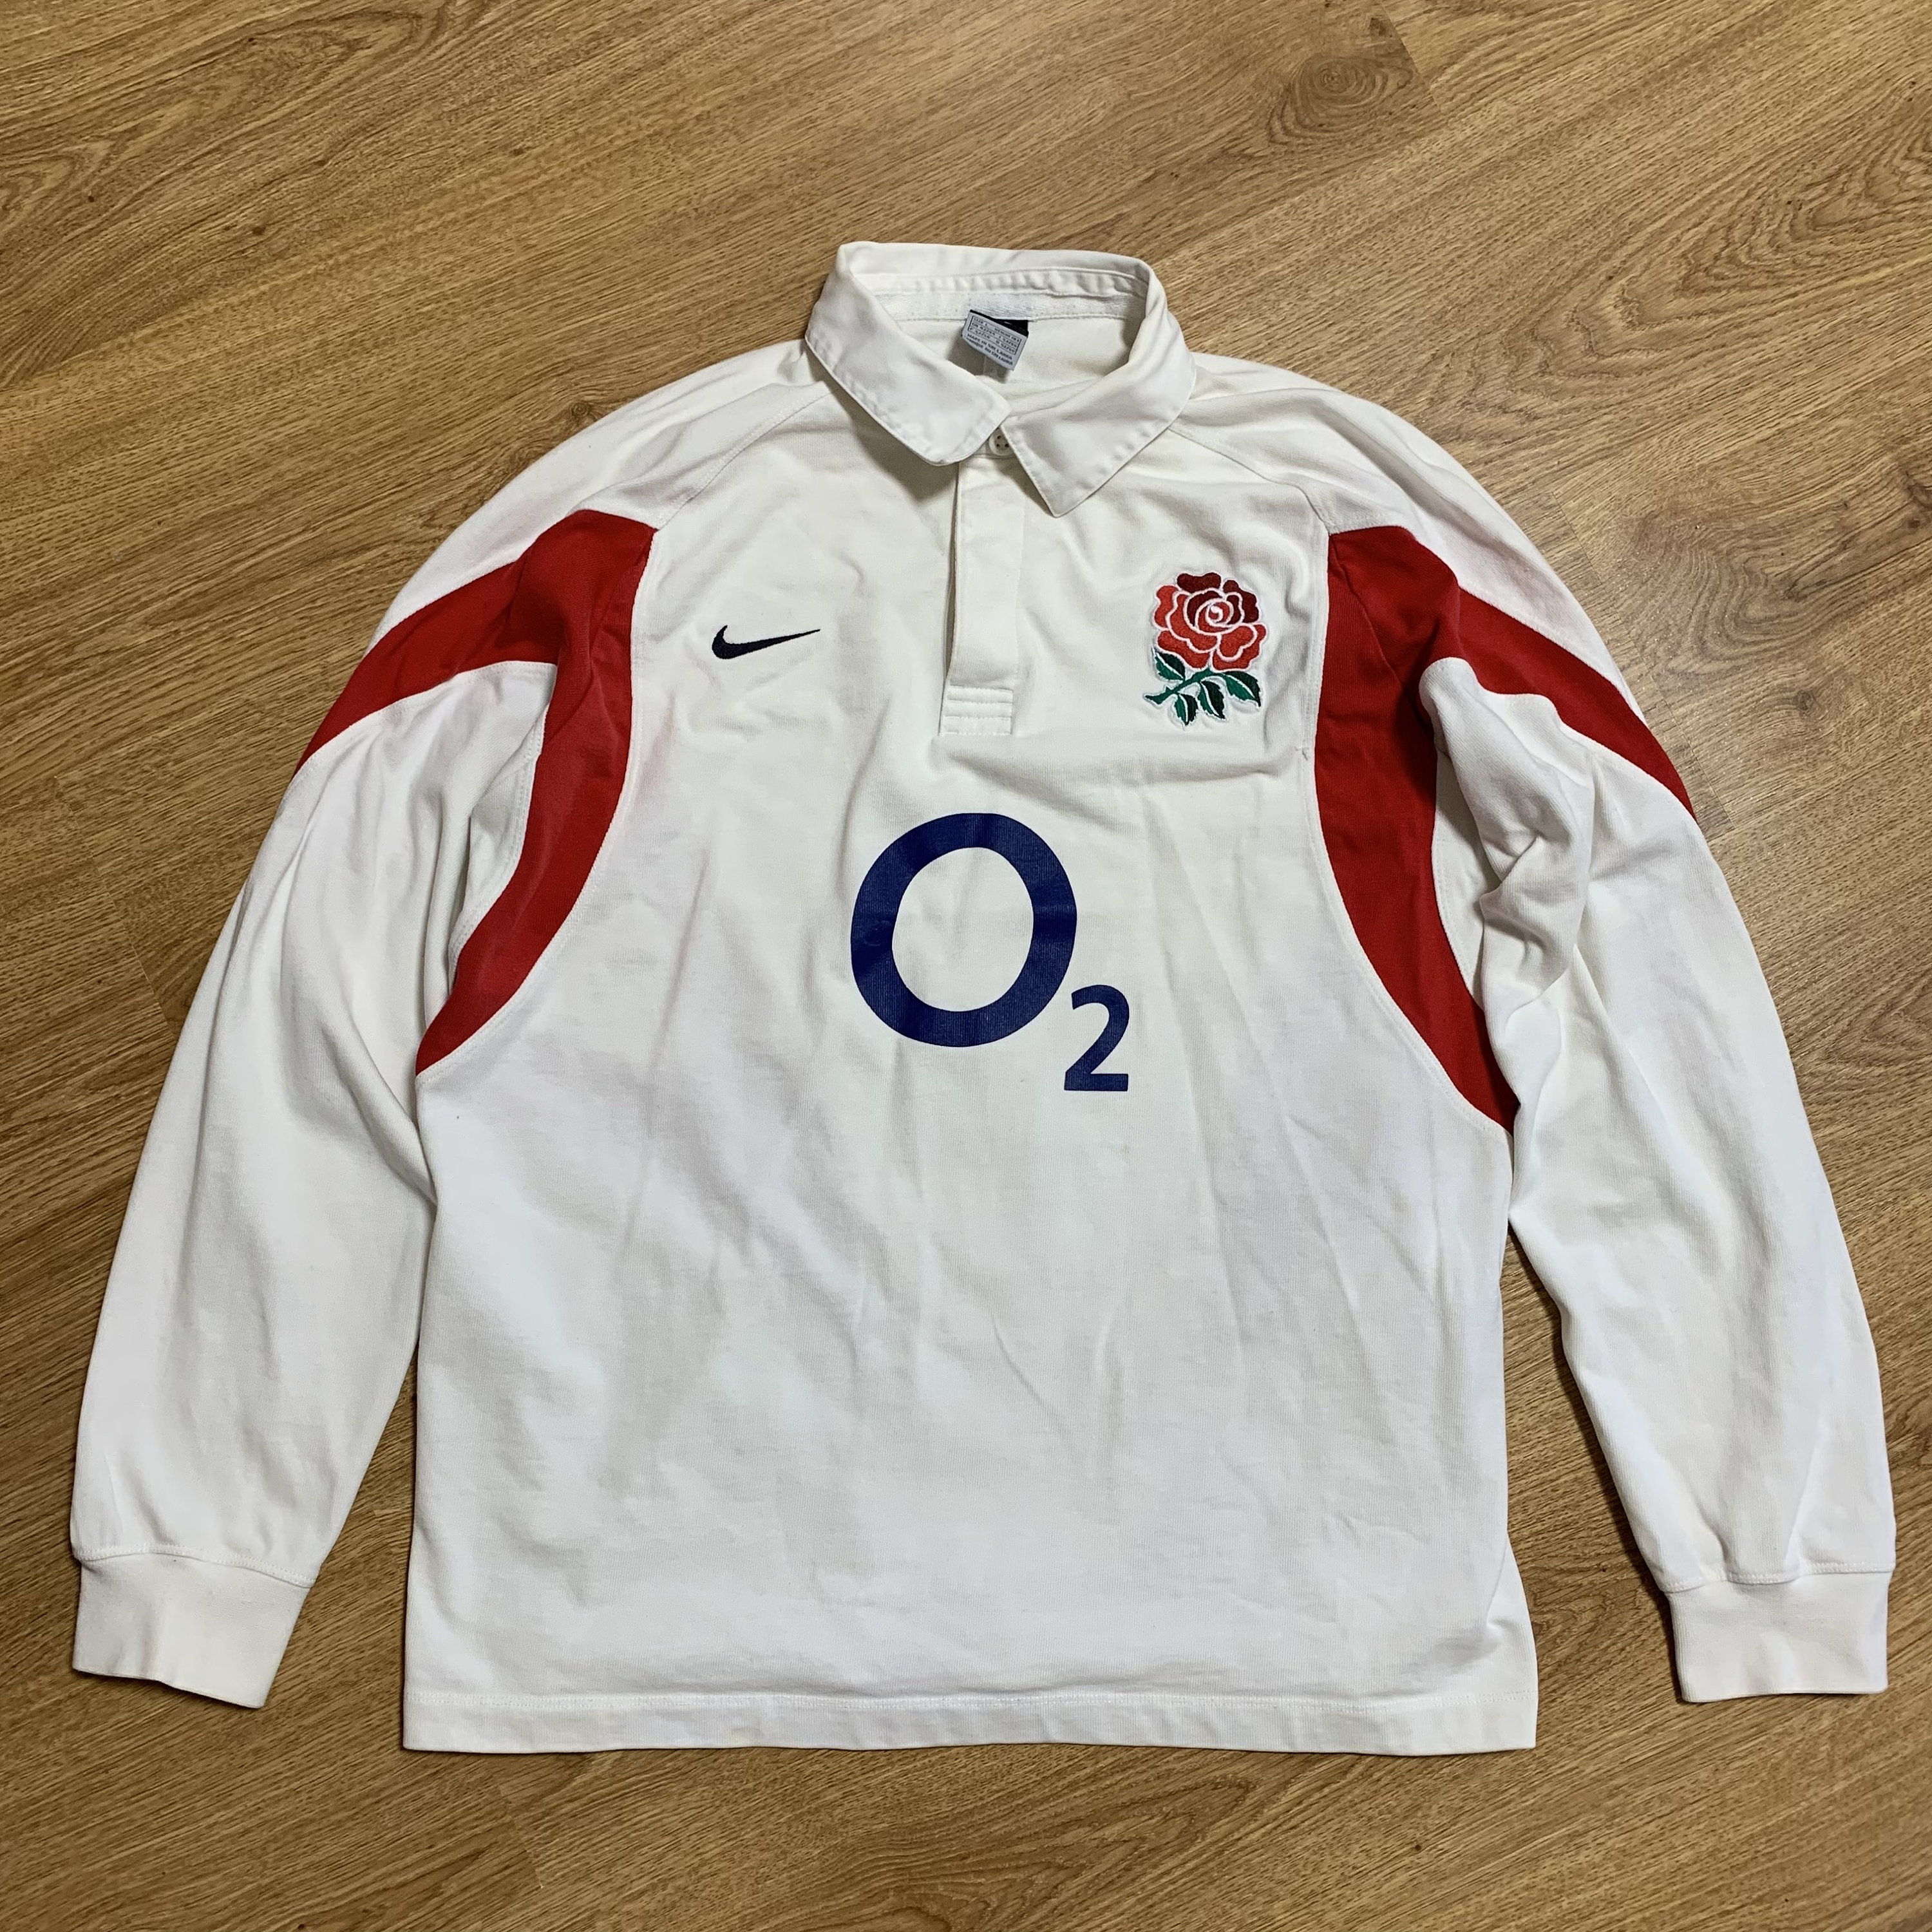 England Long Sleeve Rugby Shirt Jersey Nike Vintage Size L | Etsy